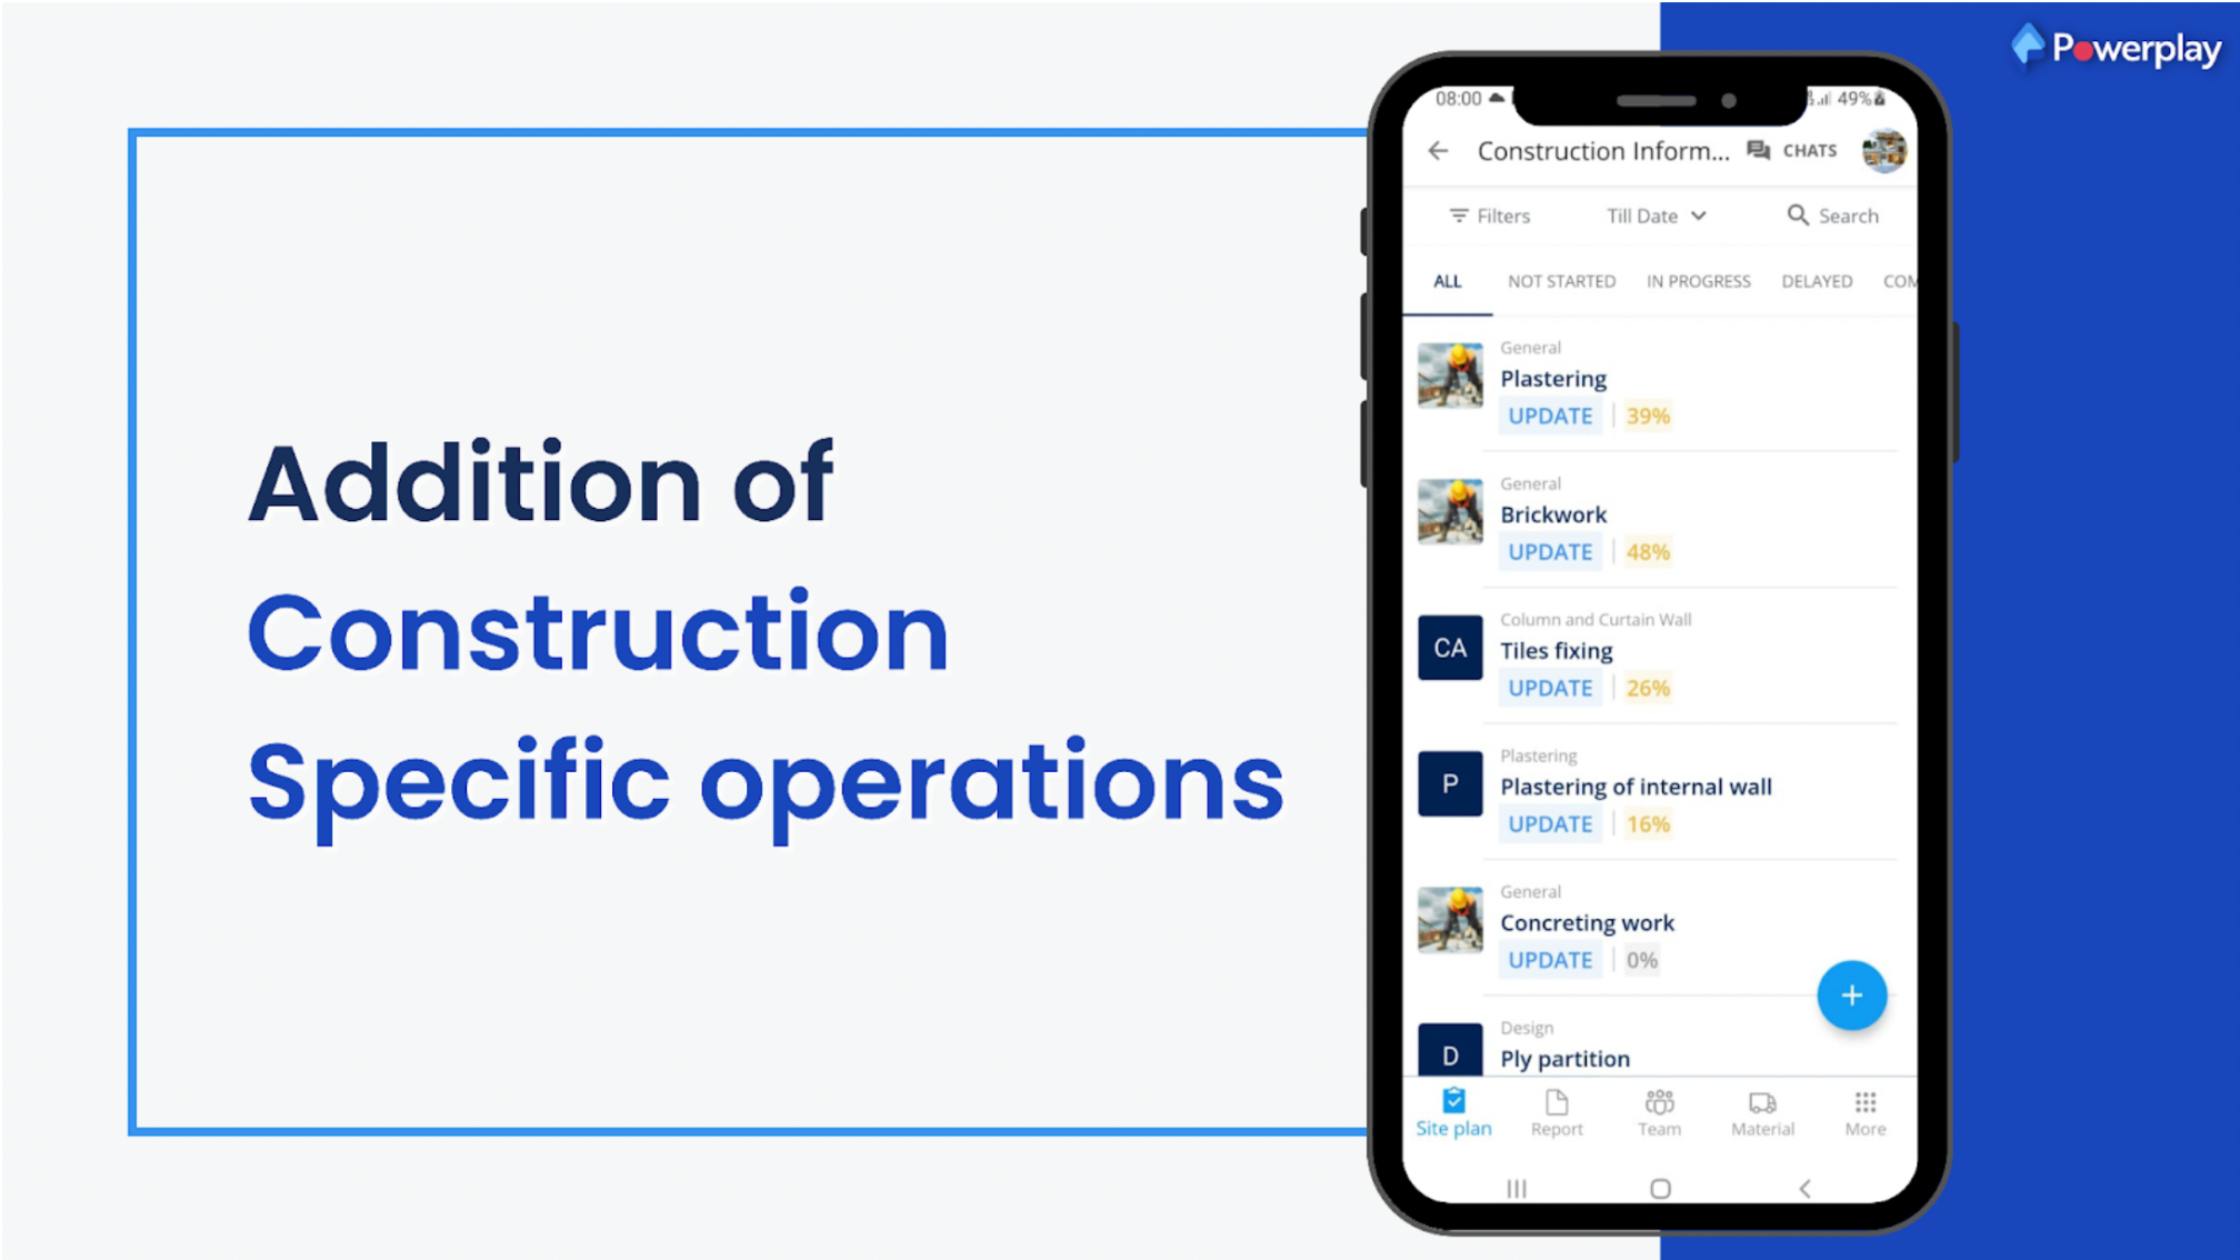  Addition of Construction Specific operations